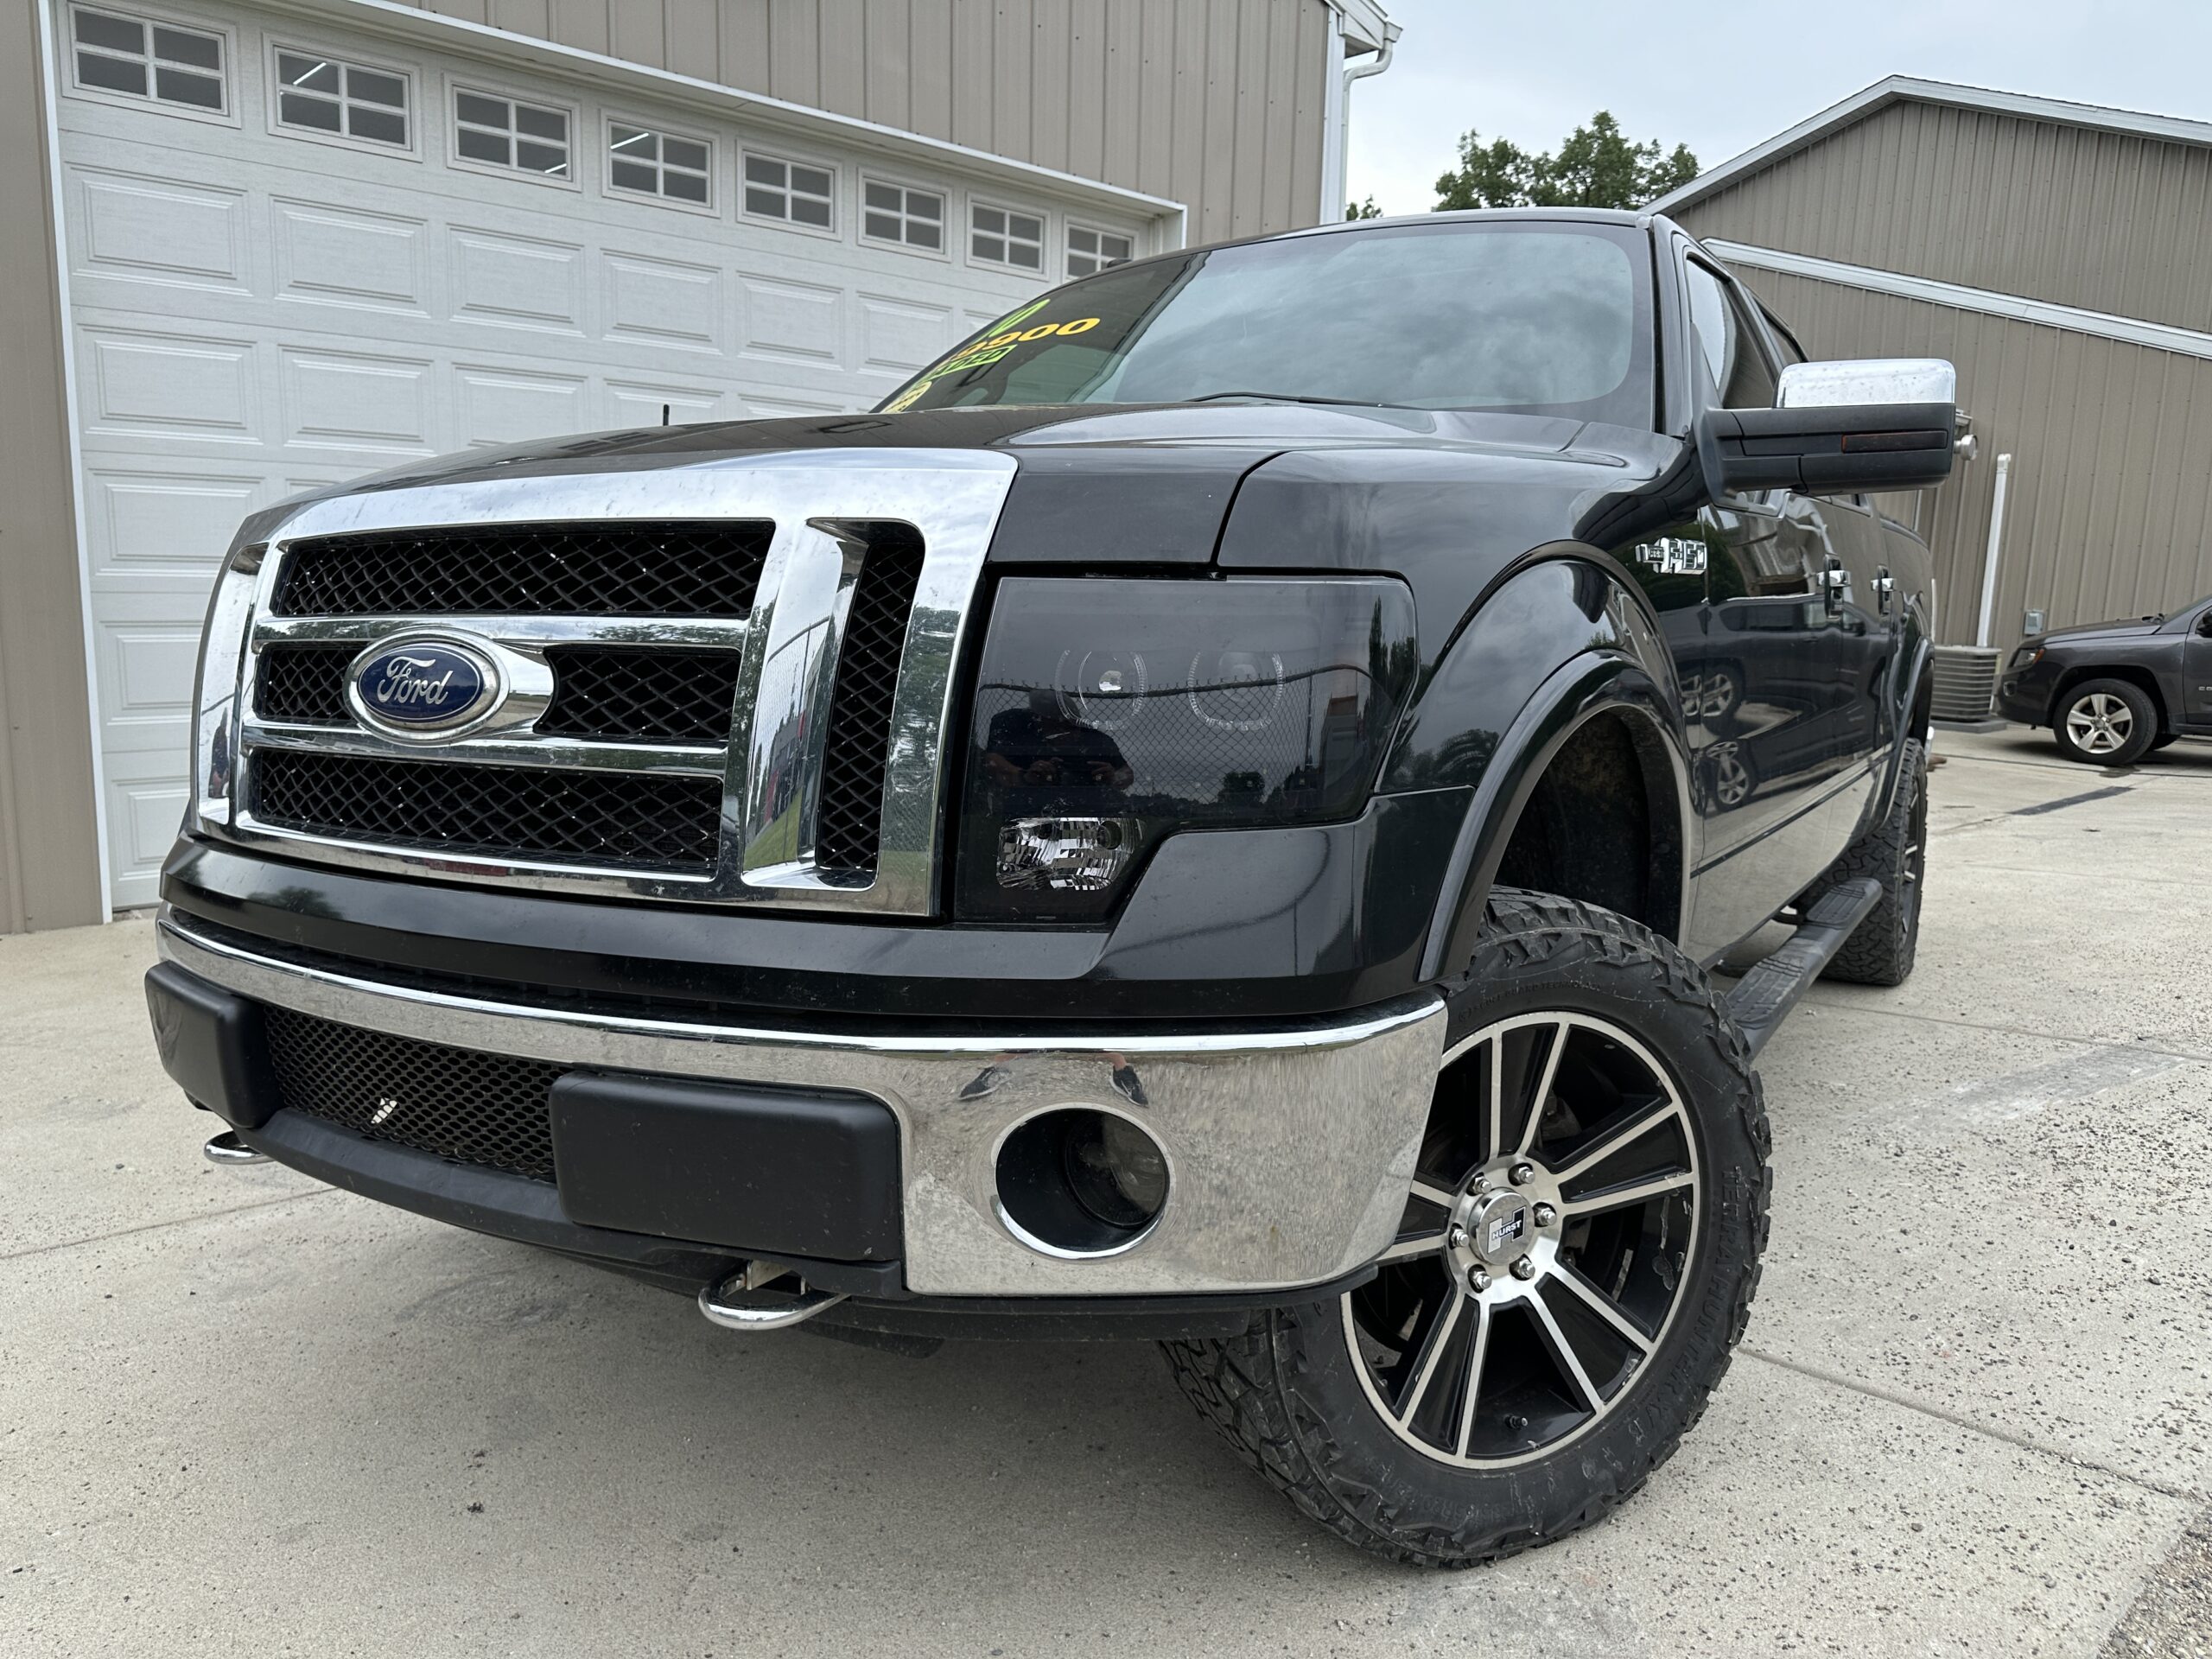 2010 Ford F-150 For Sale Lariat Crew Cab 4WD